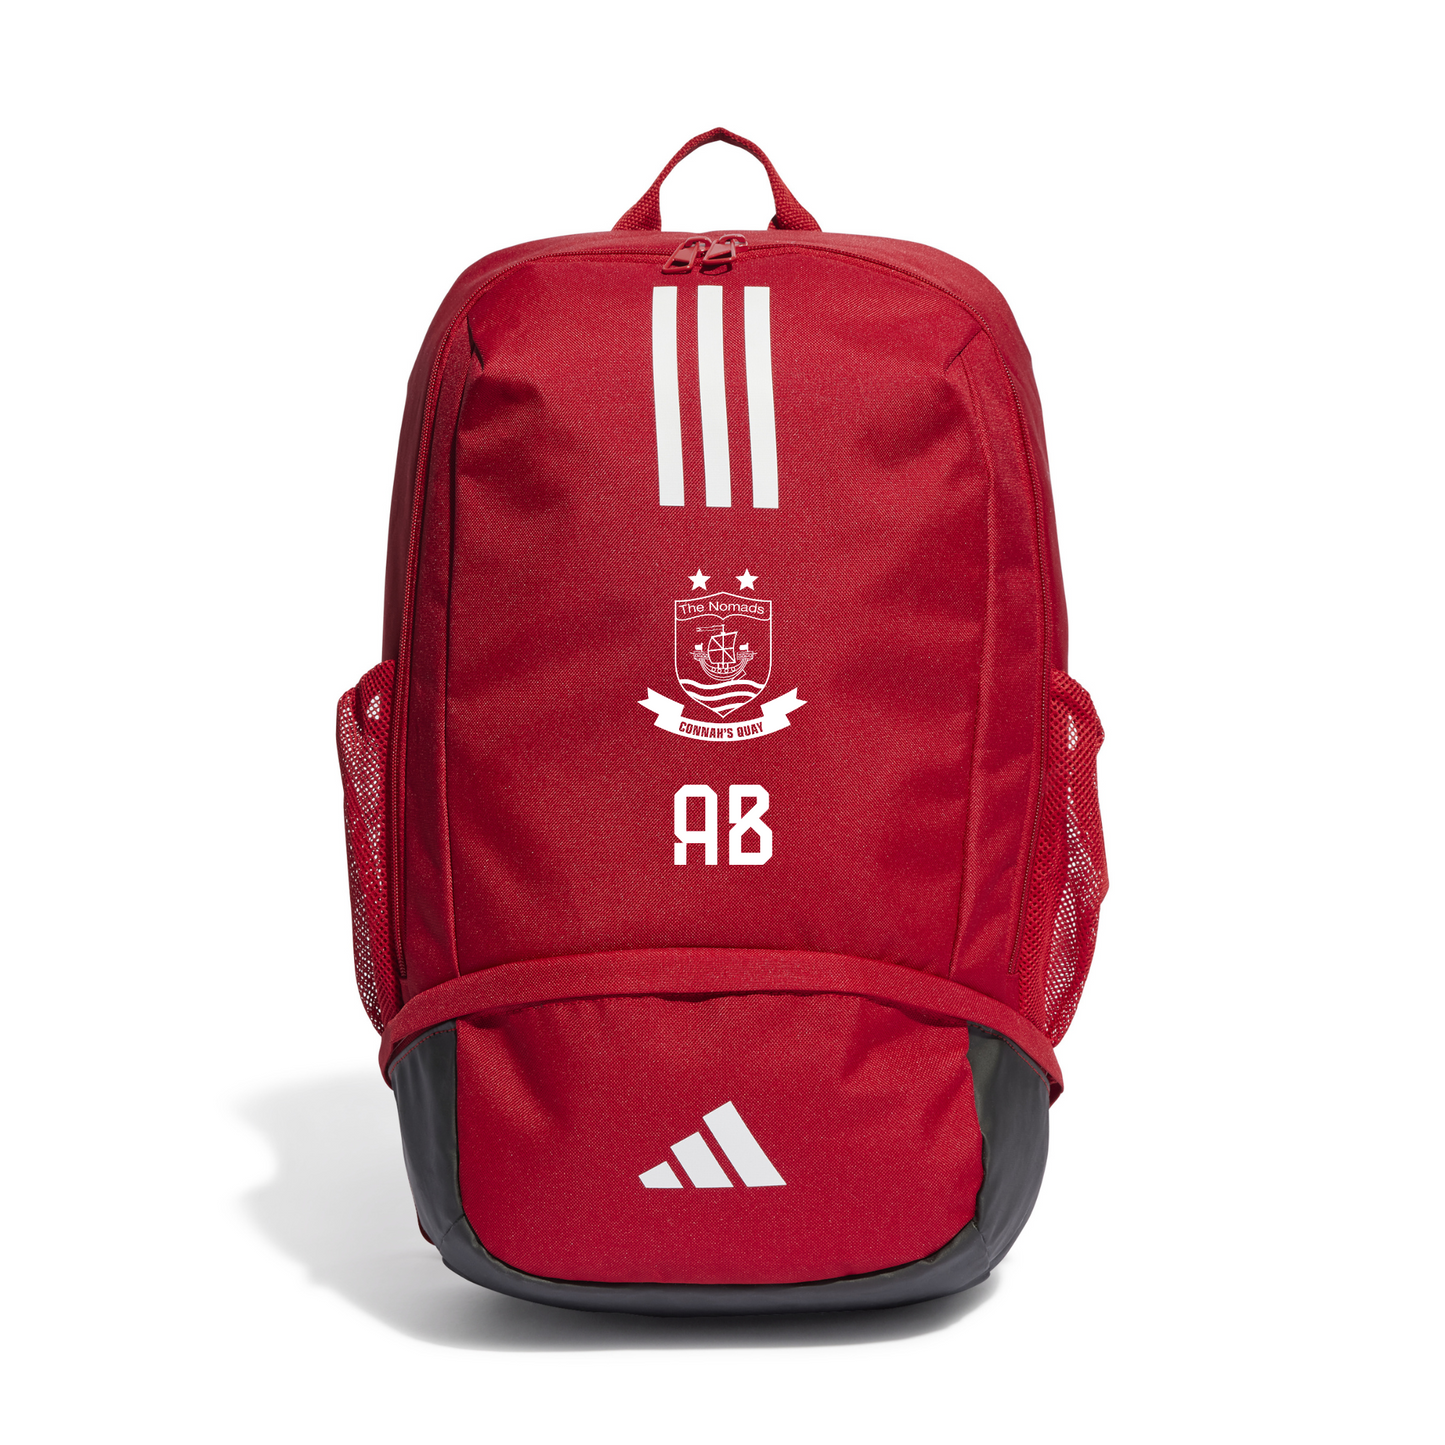 Nomads Academy Players Backpack